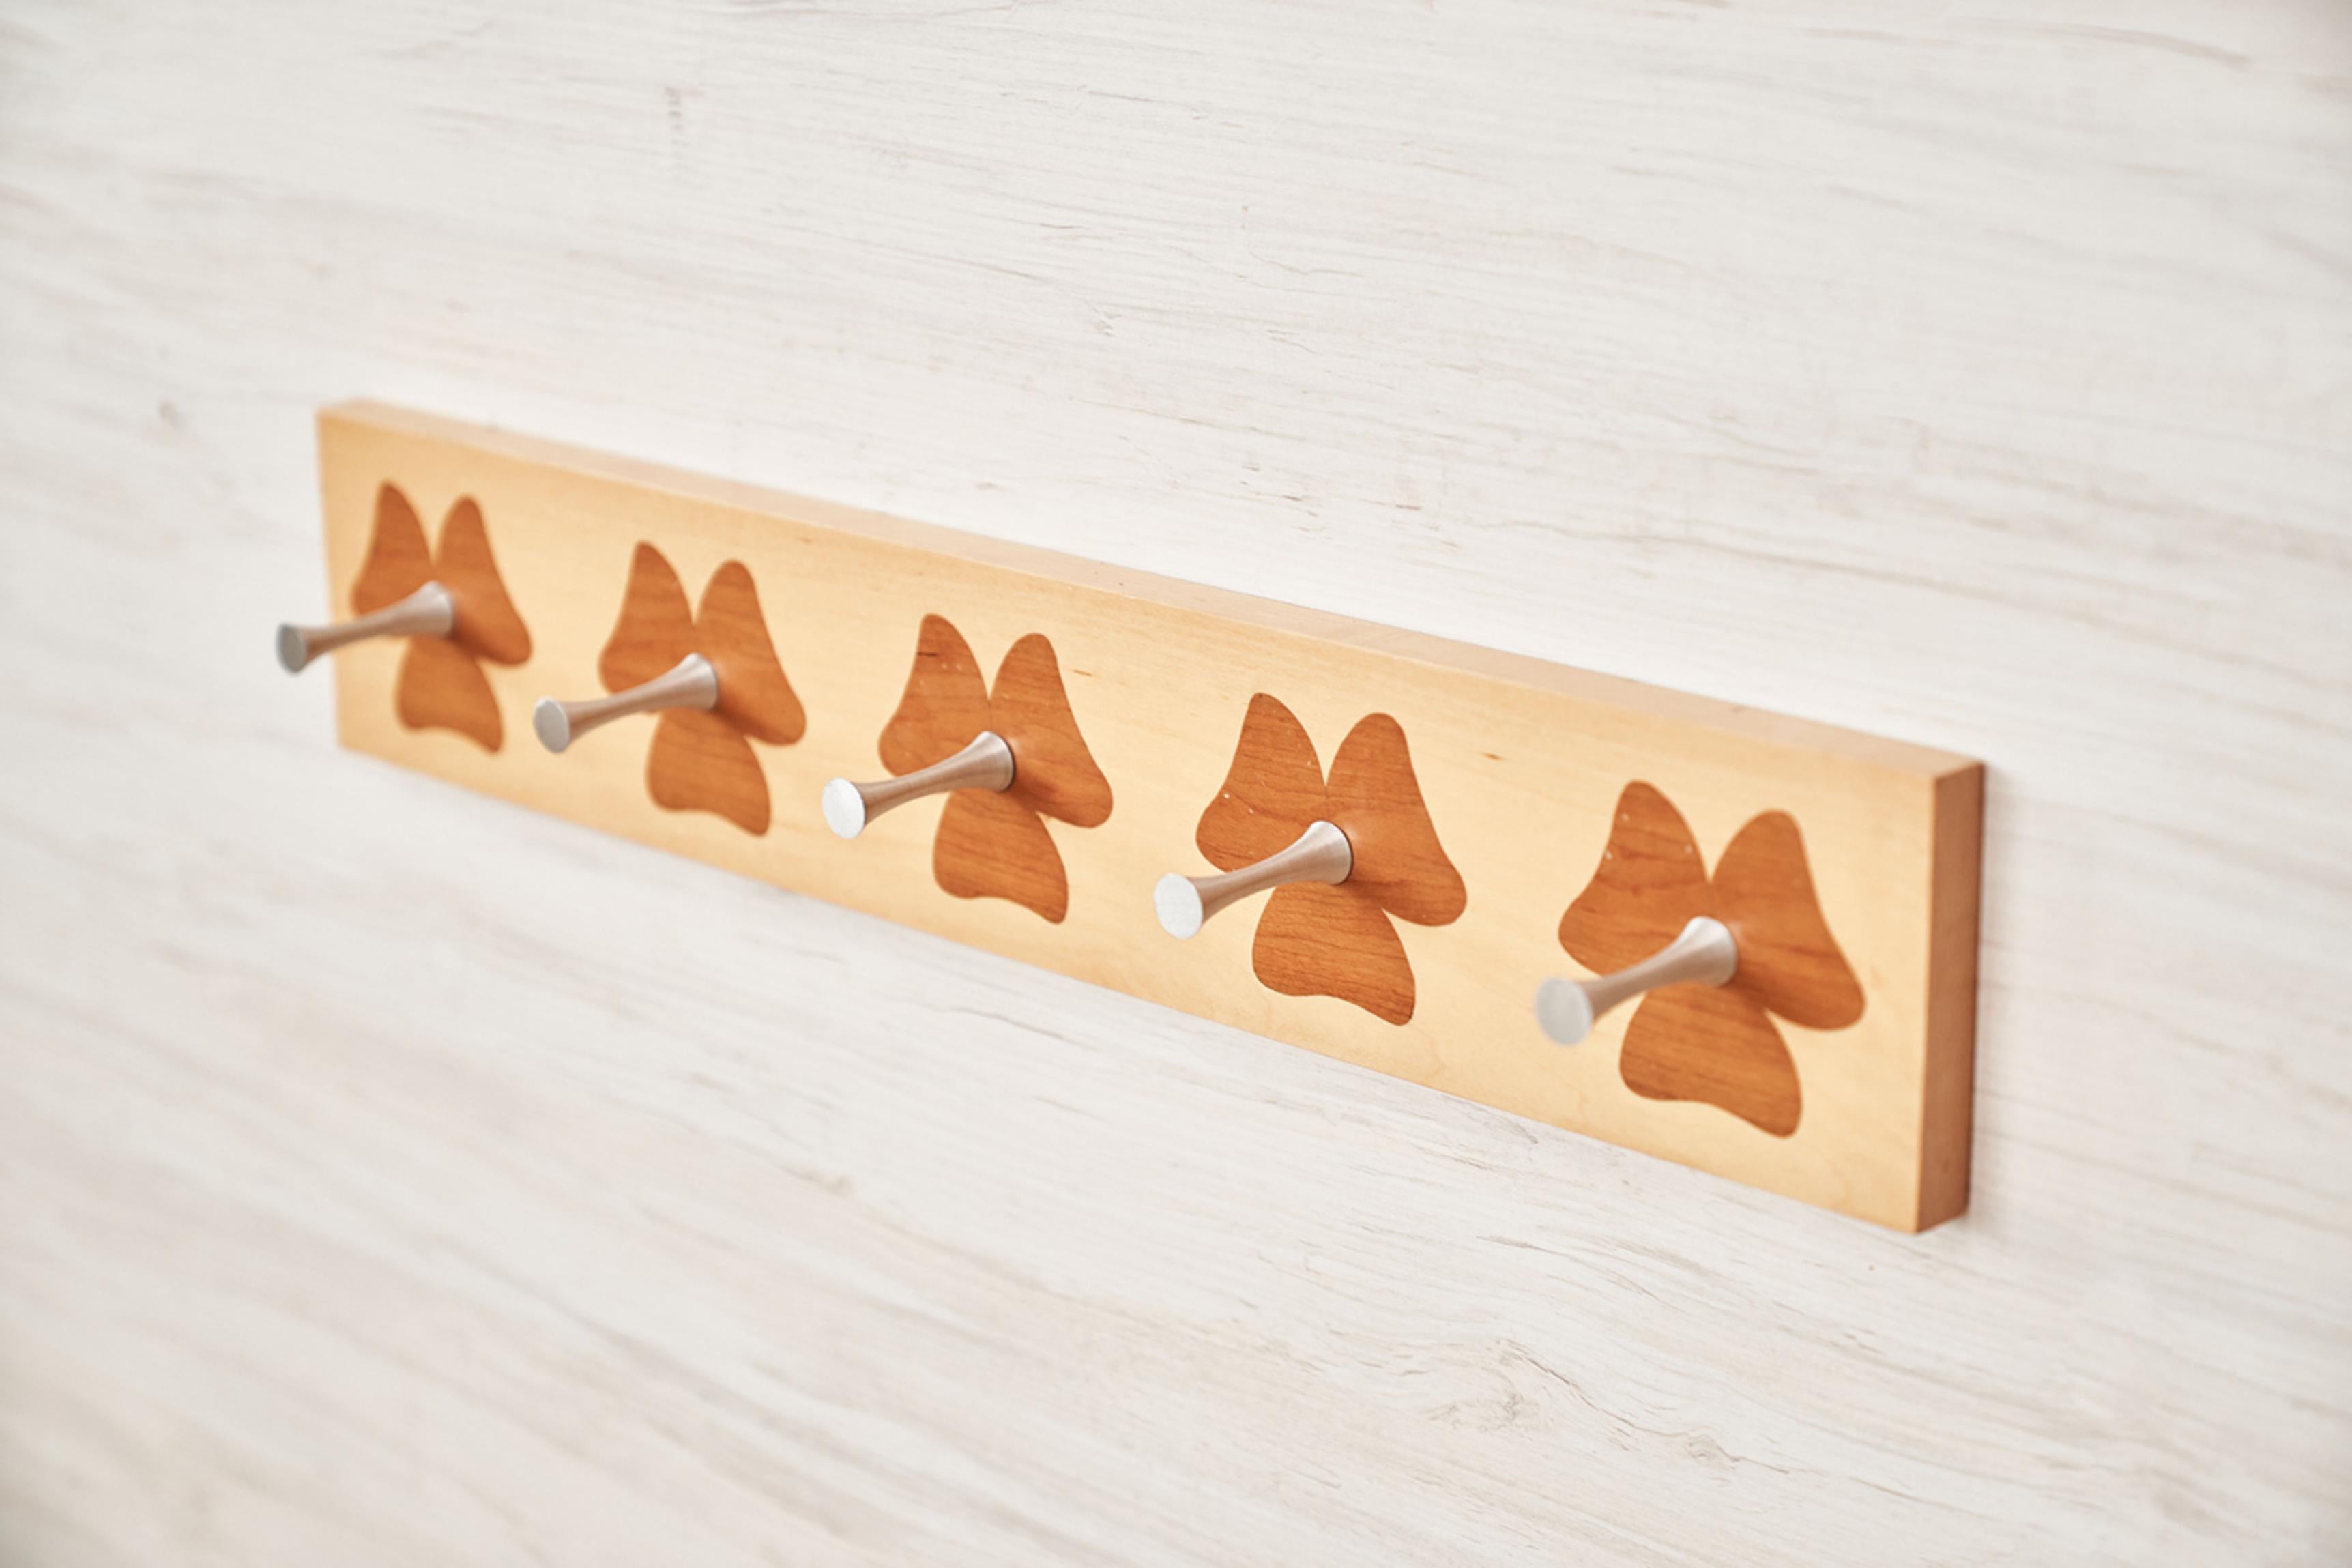 Flower Rack by Jean-Baptiste Van den Heede
Dimensions: W 69 x D 9 x H 12 cm
Materials: Cherry, Maple, Aluminum.
Also available: Other sizes can be made to order,

This coat rack is made in maple and cherry marquetry with aluminum